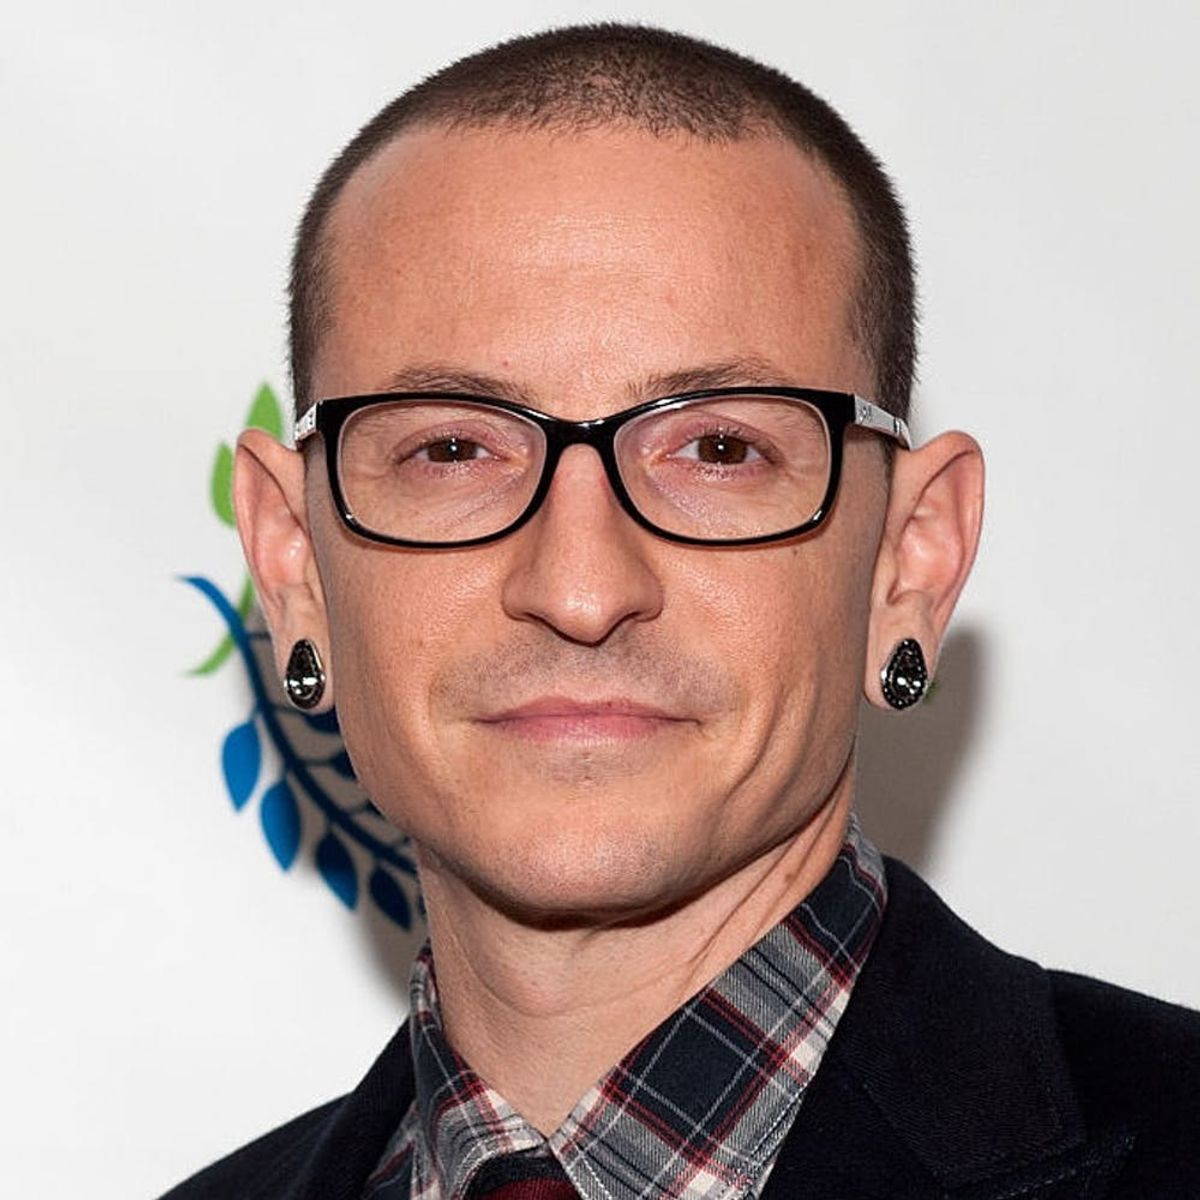 Linkin Park’s Chester Bennington Has Died at Age 41